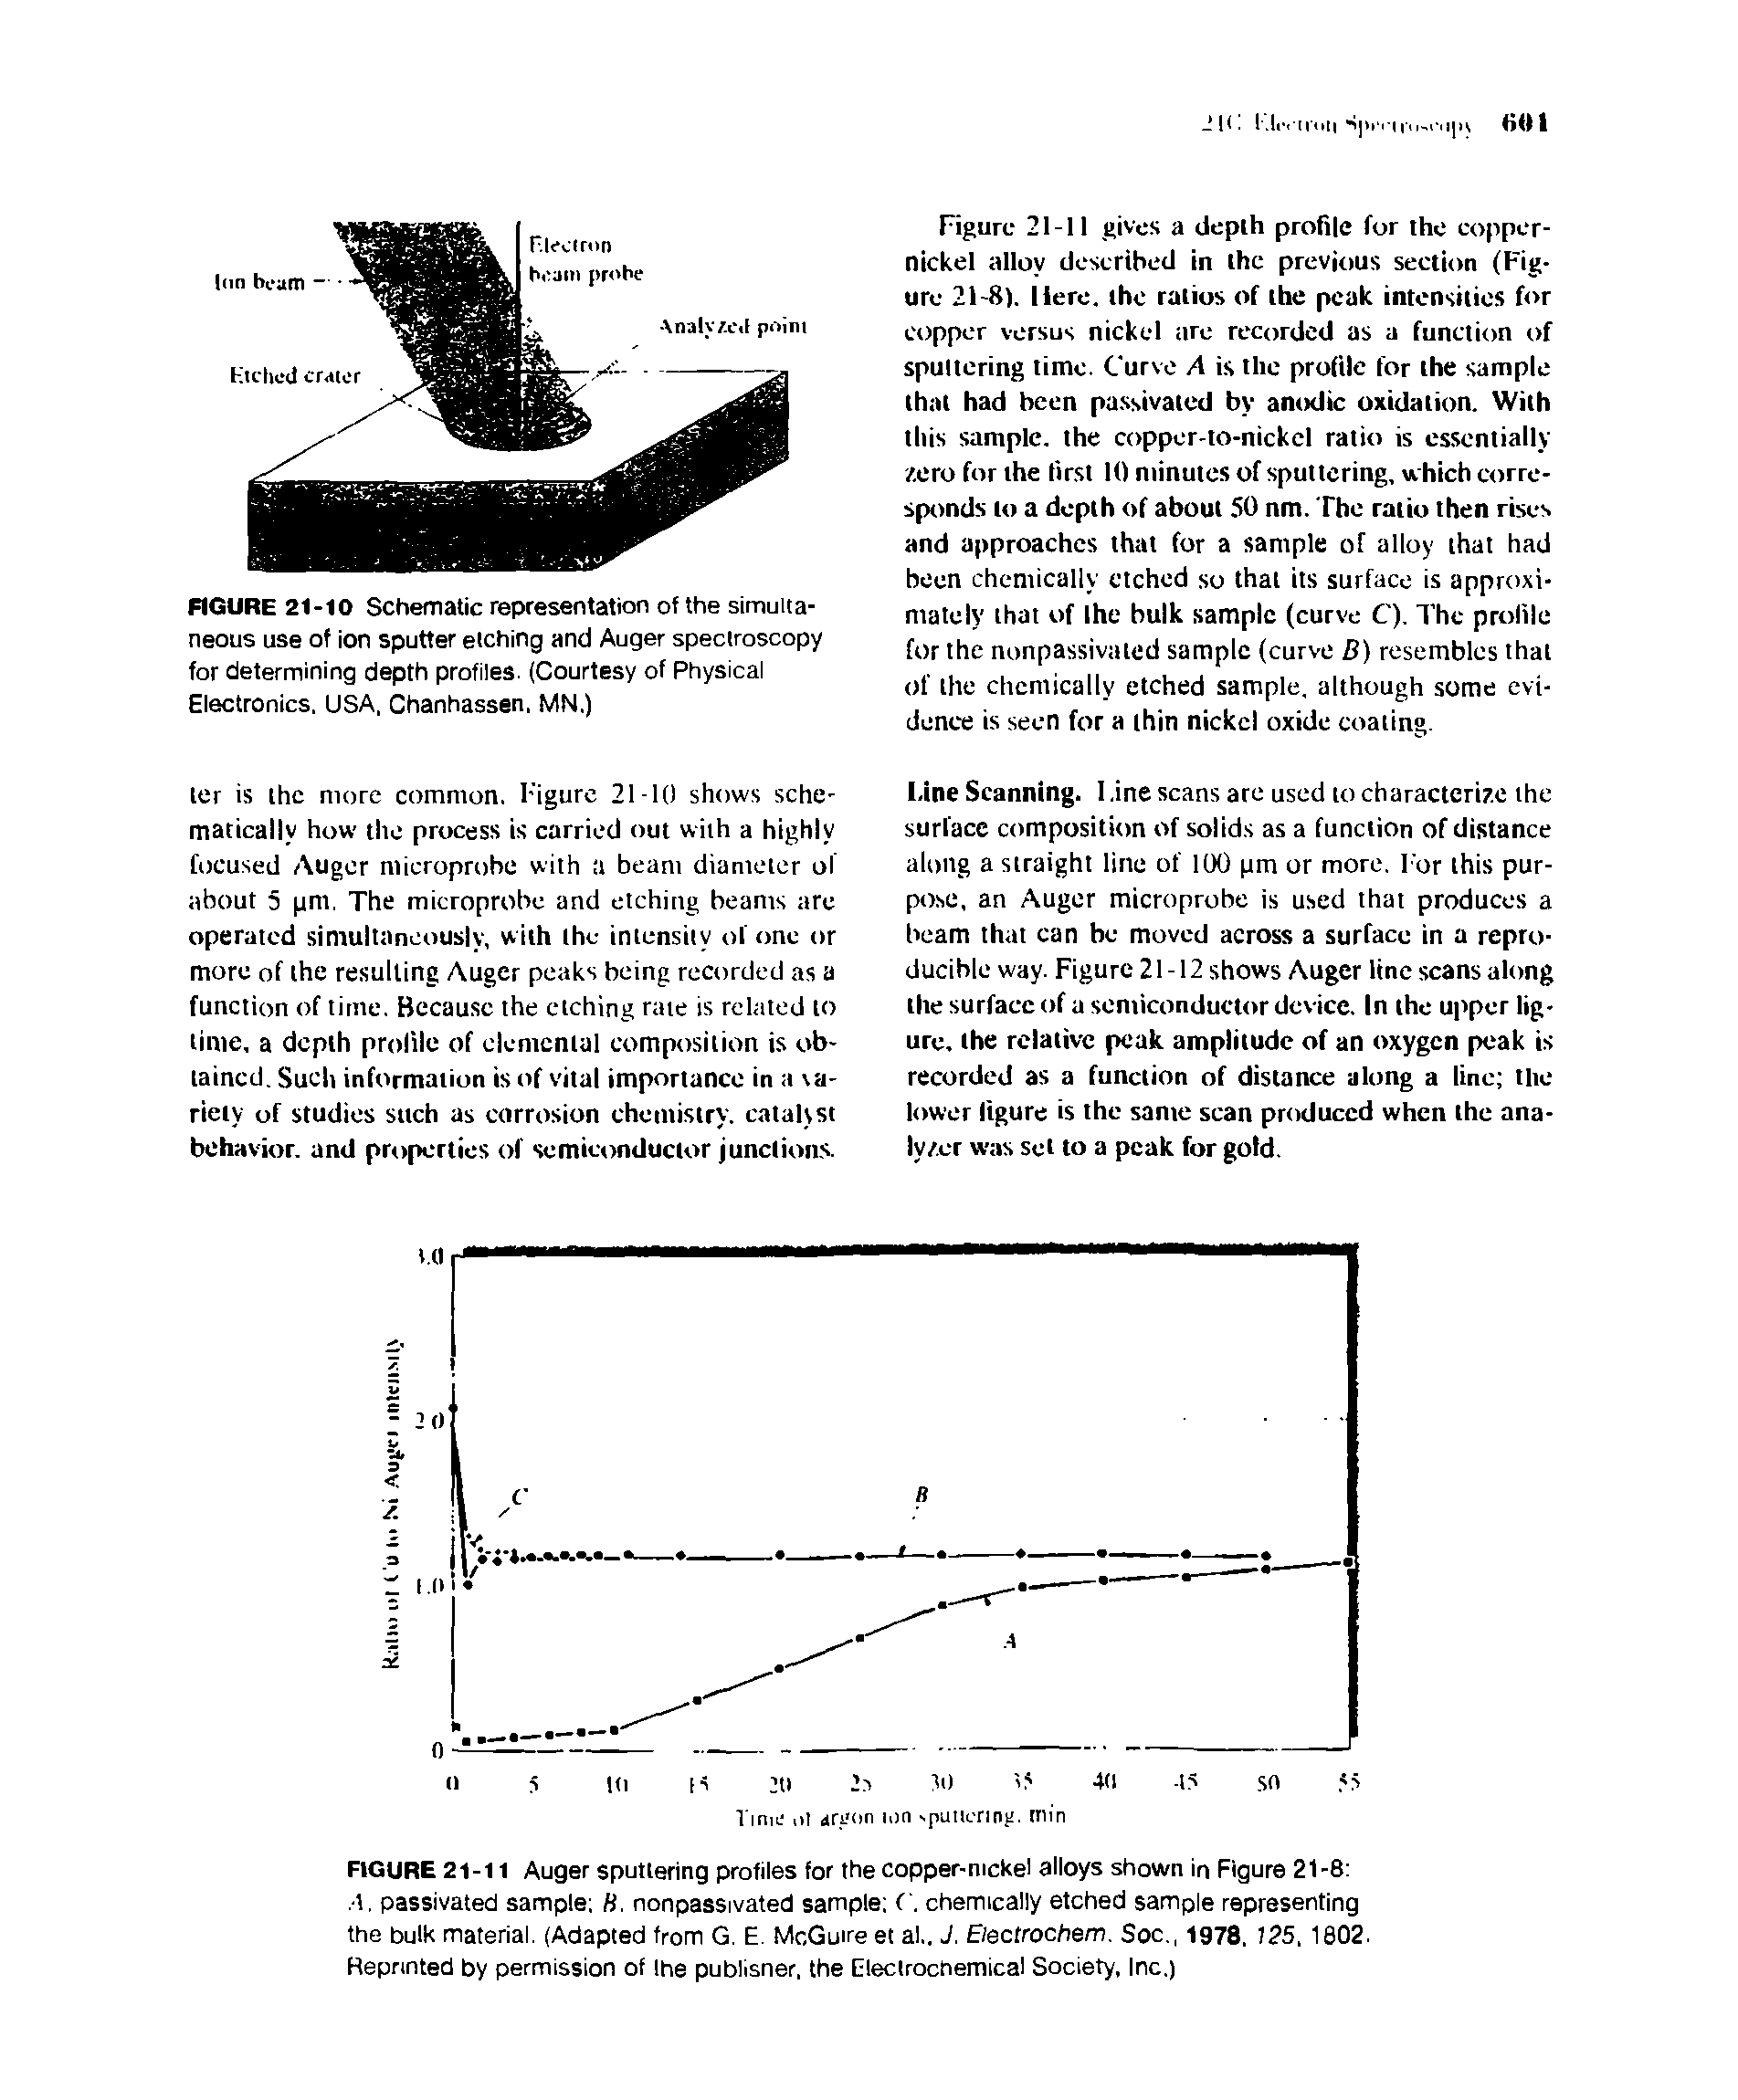 Figure 21-11 gives a depth profile for the copper-nickel alloy described in the previous sectitrn (Figure 21-8). Here, the ratios of the peak intensities for copper versus nickel are recorded as a function of sputtering time. Curve A is the profile for the sample that had been pa.ssivated by anodic oxidation. With this sample, the copper-to-nickel ratio is essentially zero for the first 10 minutes of sputtering, w hich corresponds to a depth of about SO nm. The ratio then rises and approaches that for a sample of alloy that had been chemically etched so that its surface is approximately that of Ihe bulk sample (curve C). The profile for the nonpassivated sample (curve B) resembles that of the chemically etched sample, although some evidence is seen for a ihin nickel oxide coating.